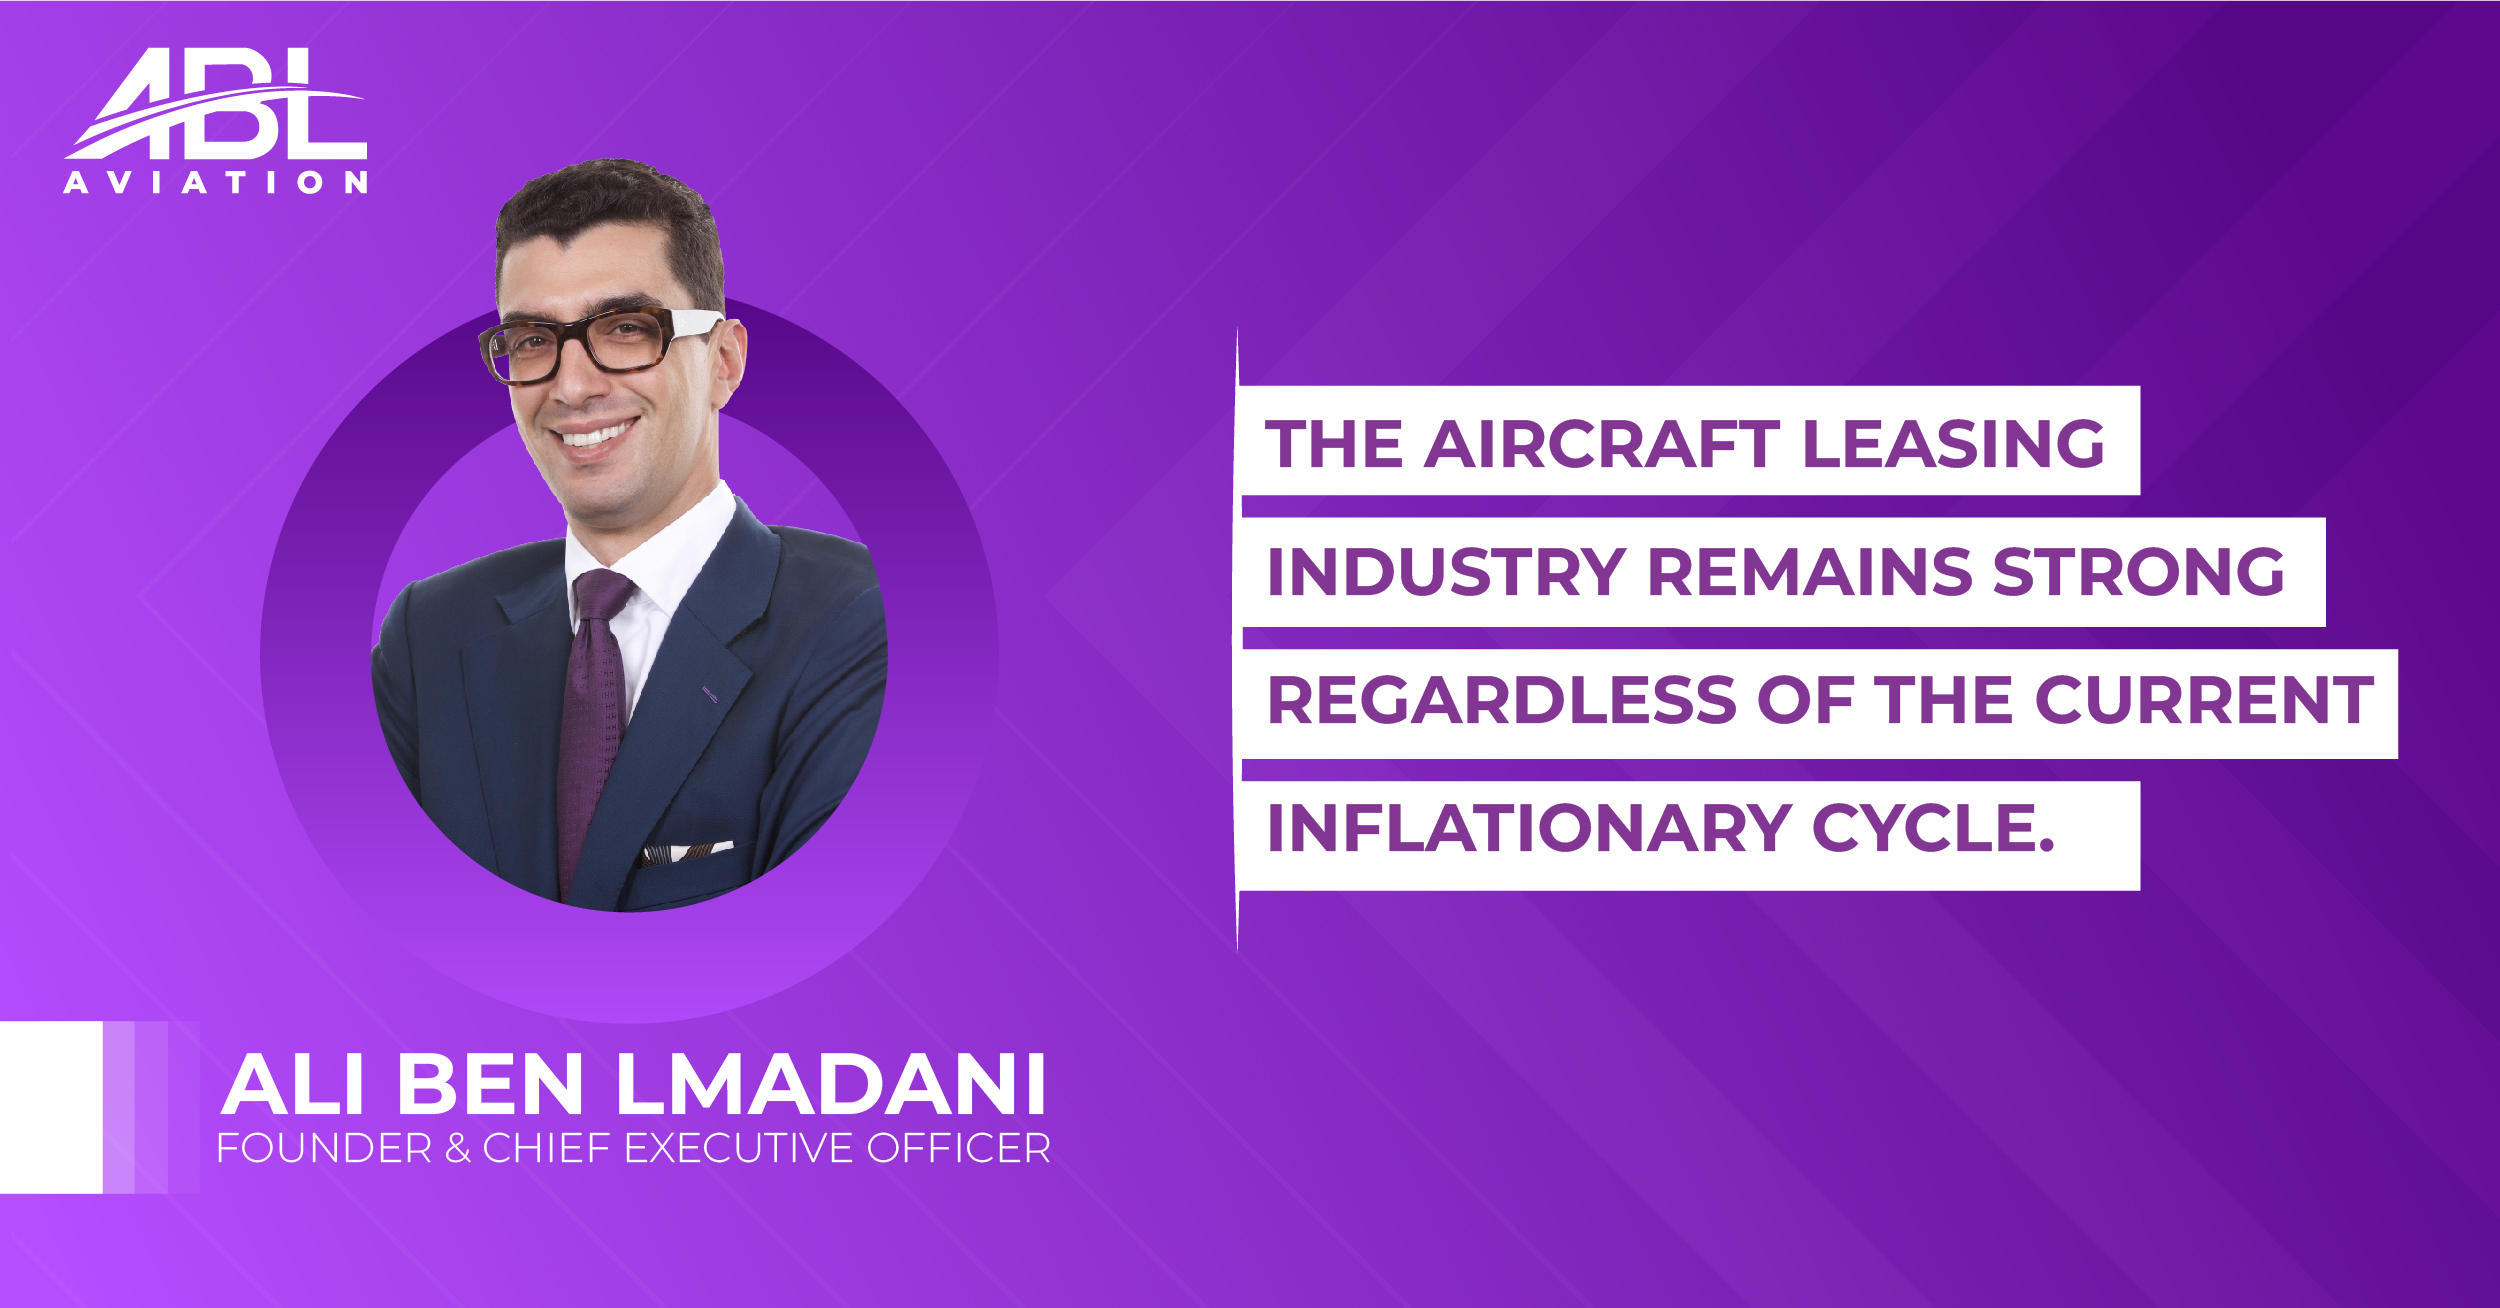 The Aircraft Leasing Industry Remains Strong Regardless of the Current Inflationary Cycle